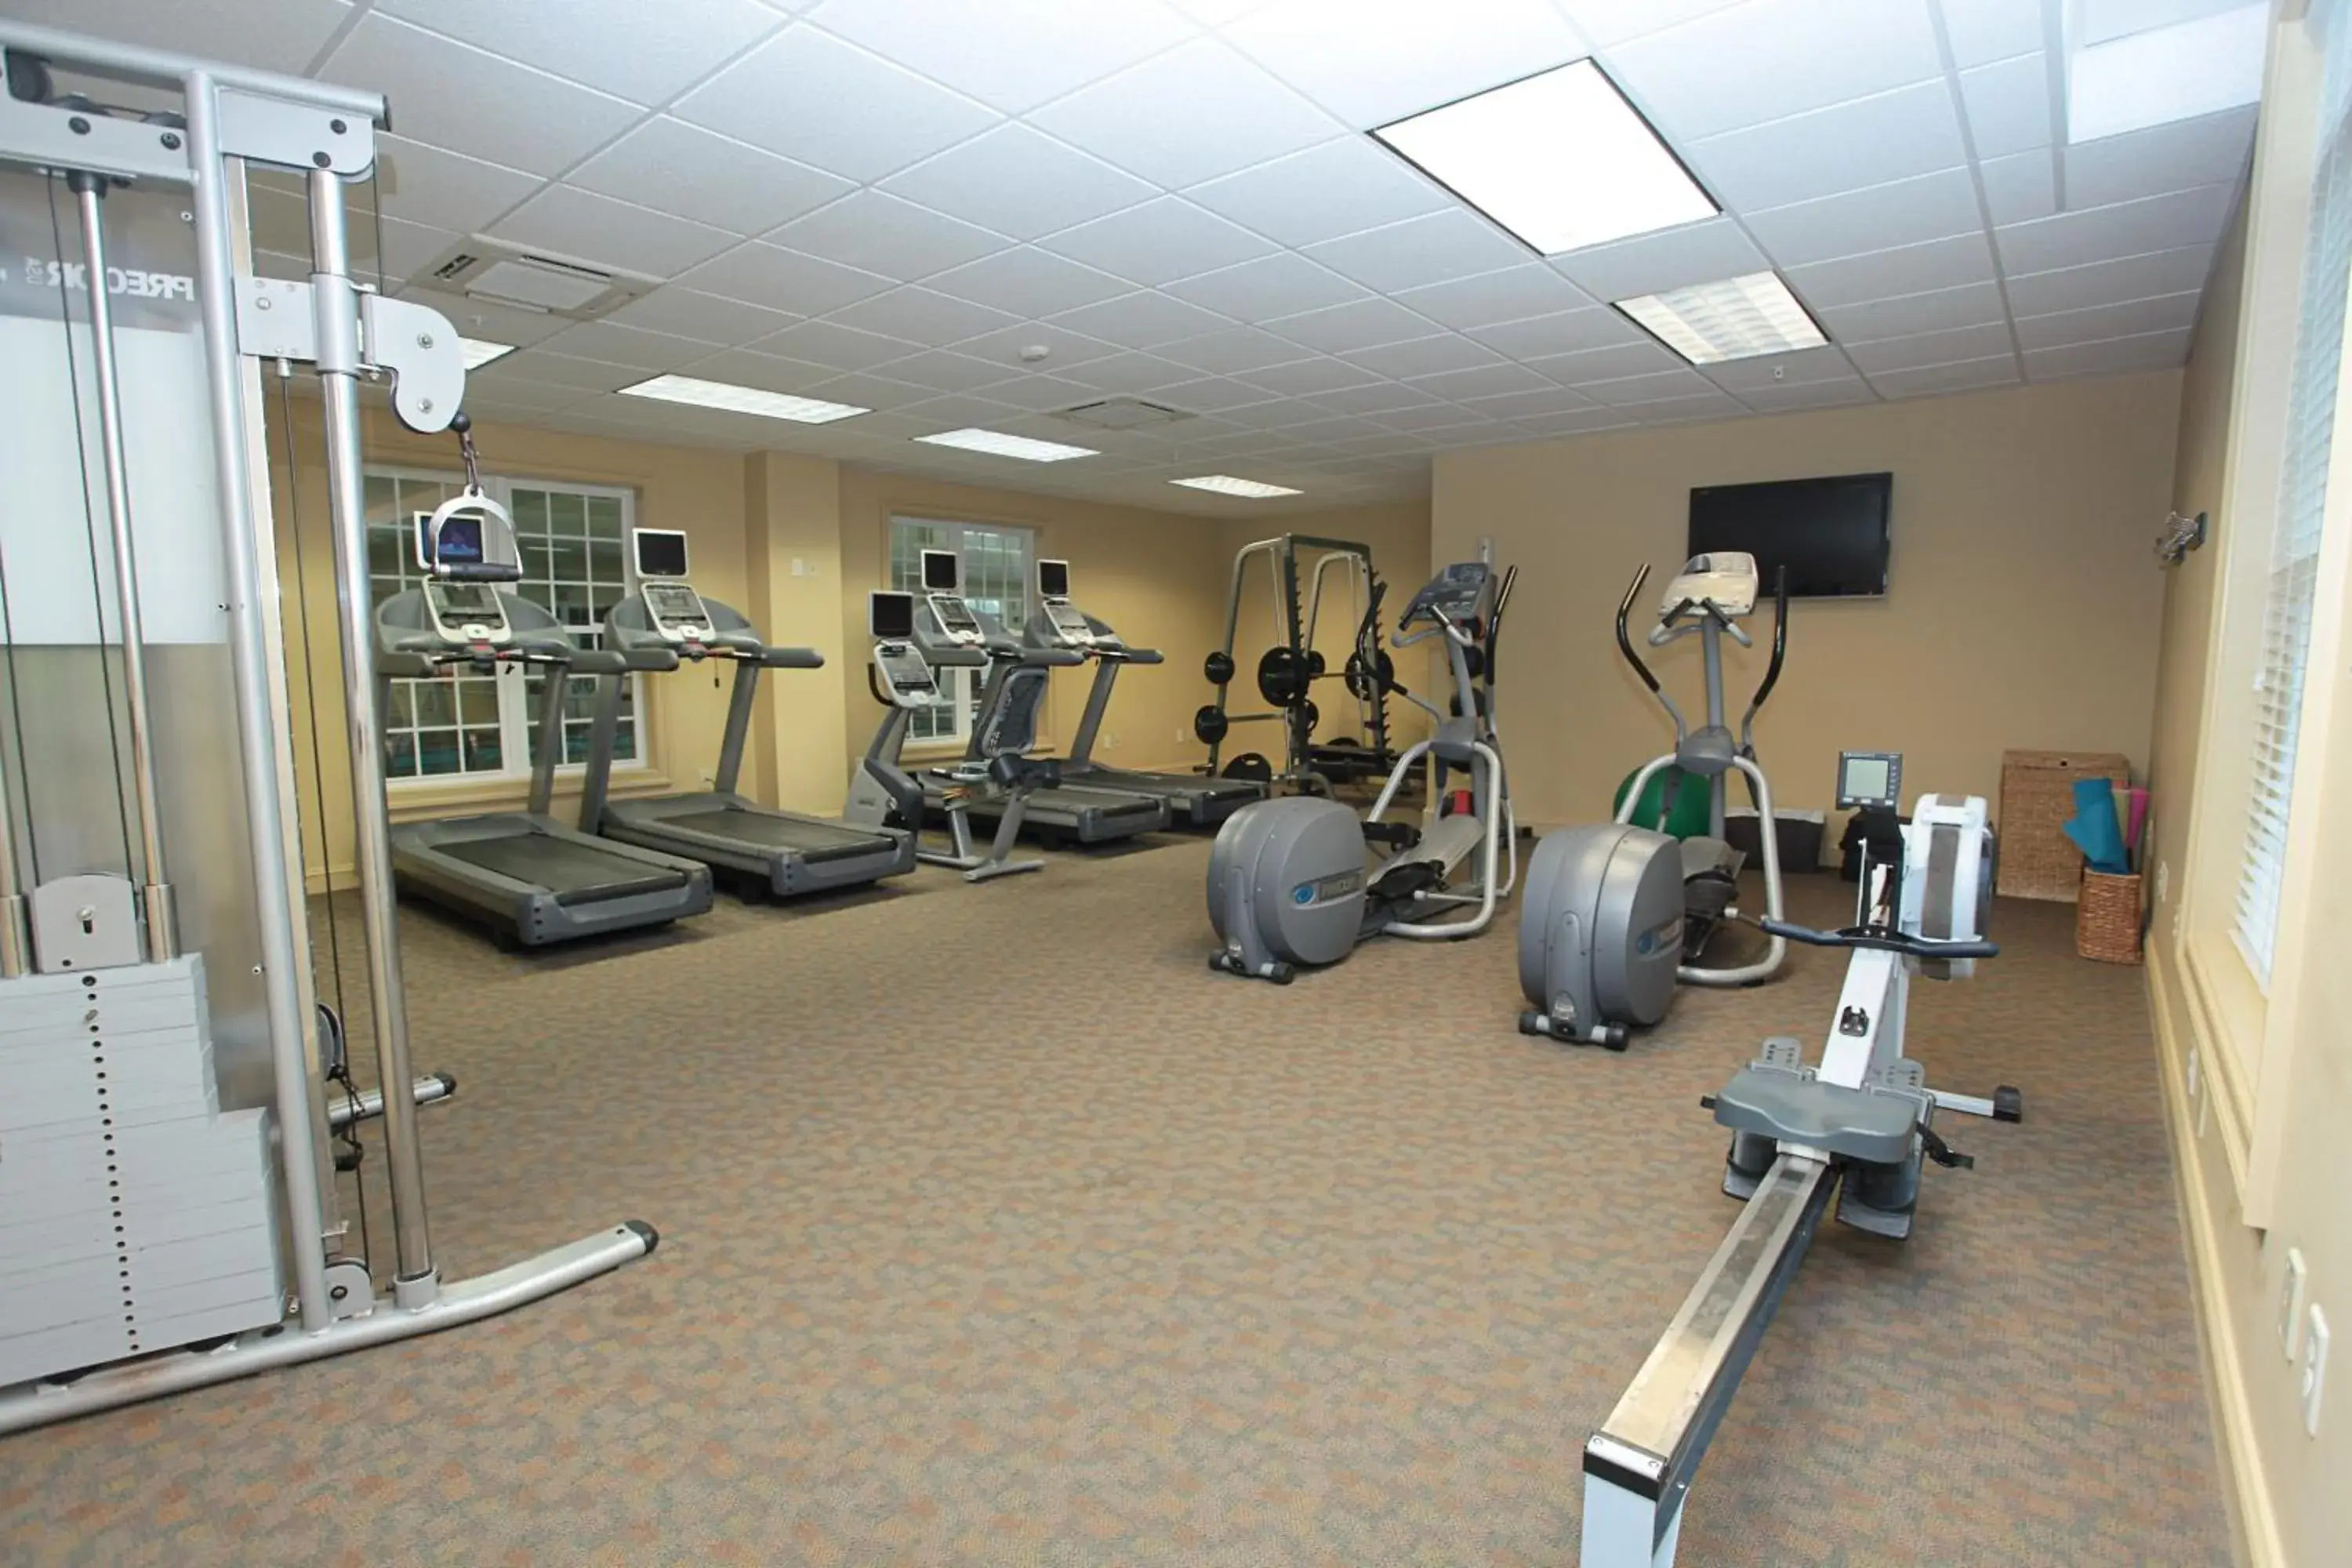 Fitness centre/facilities, Fitness Center/Facilities in Vacation Village at Williamsburg